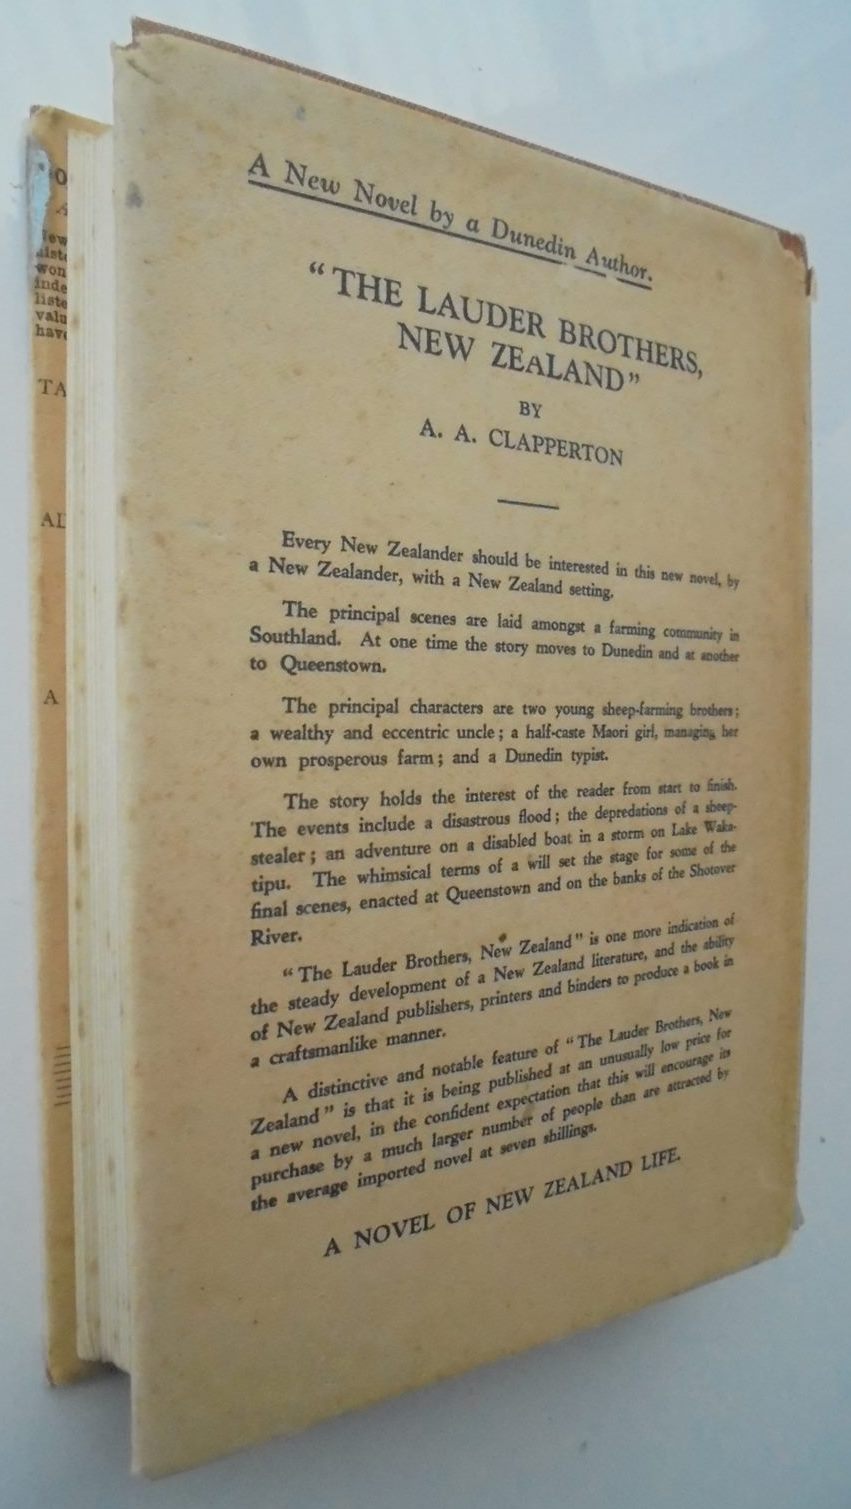 The Lauder Brothers New Zealand by A. A. Clapperton.